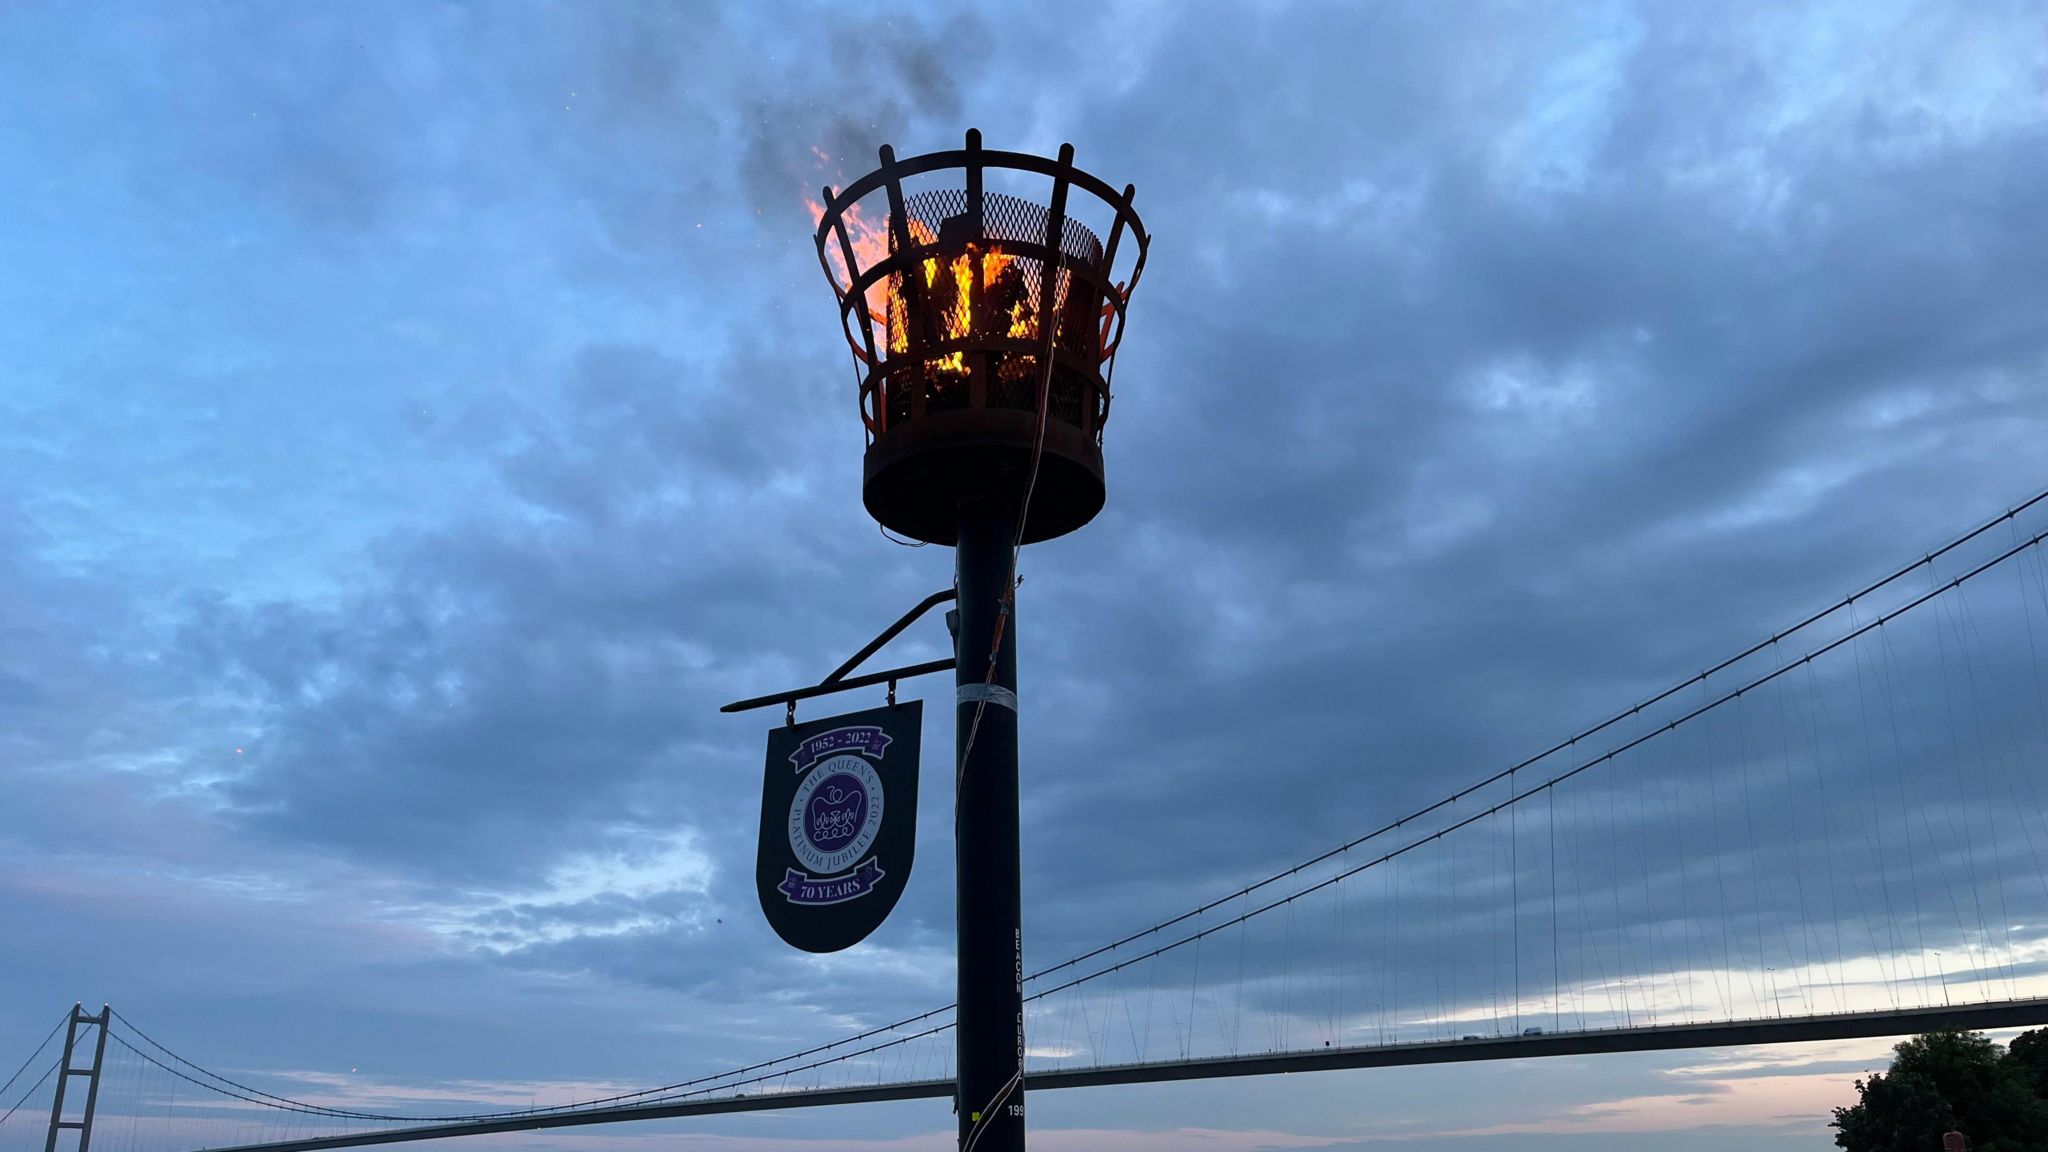 The burning beacon at Hessle Foreshore